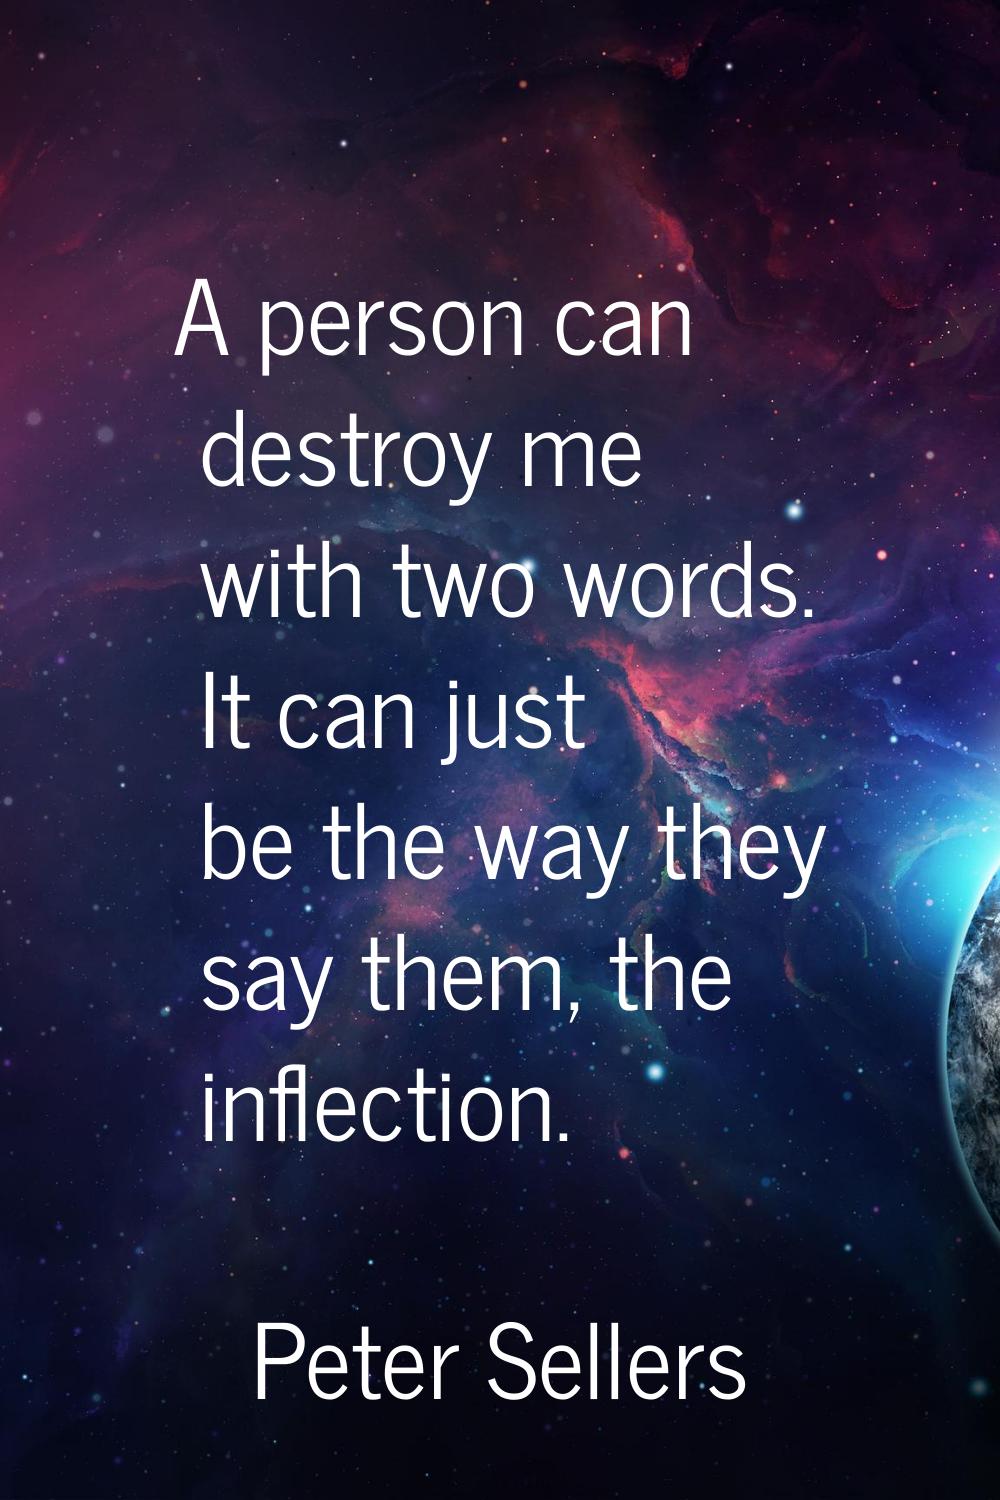 A person can destroy me with two words. It can just be the way they say them, the inflection.